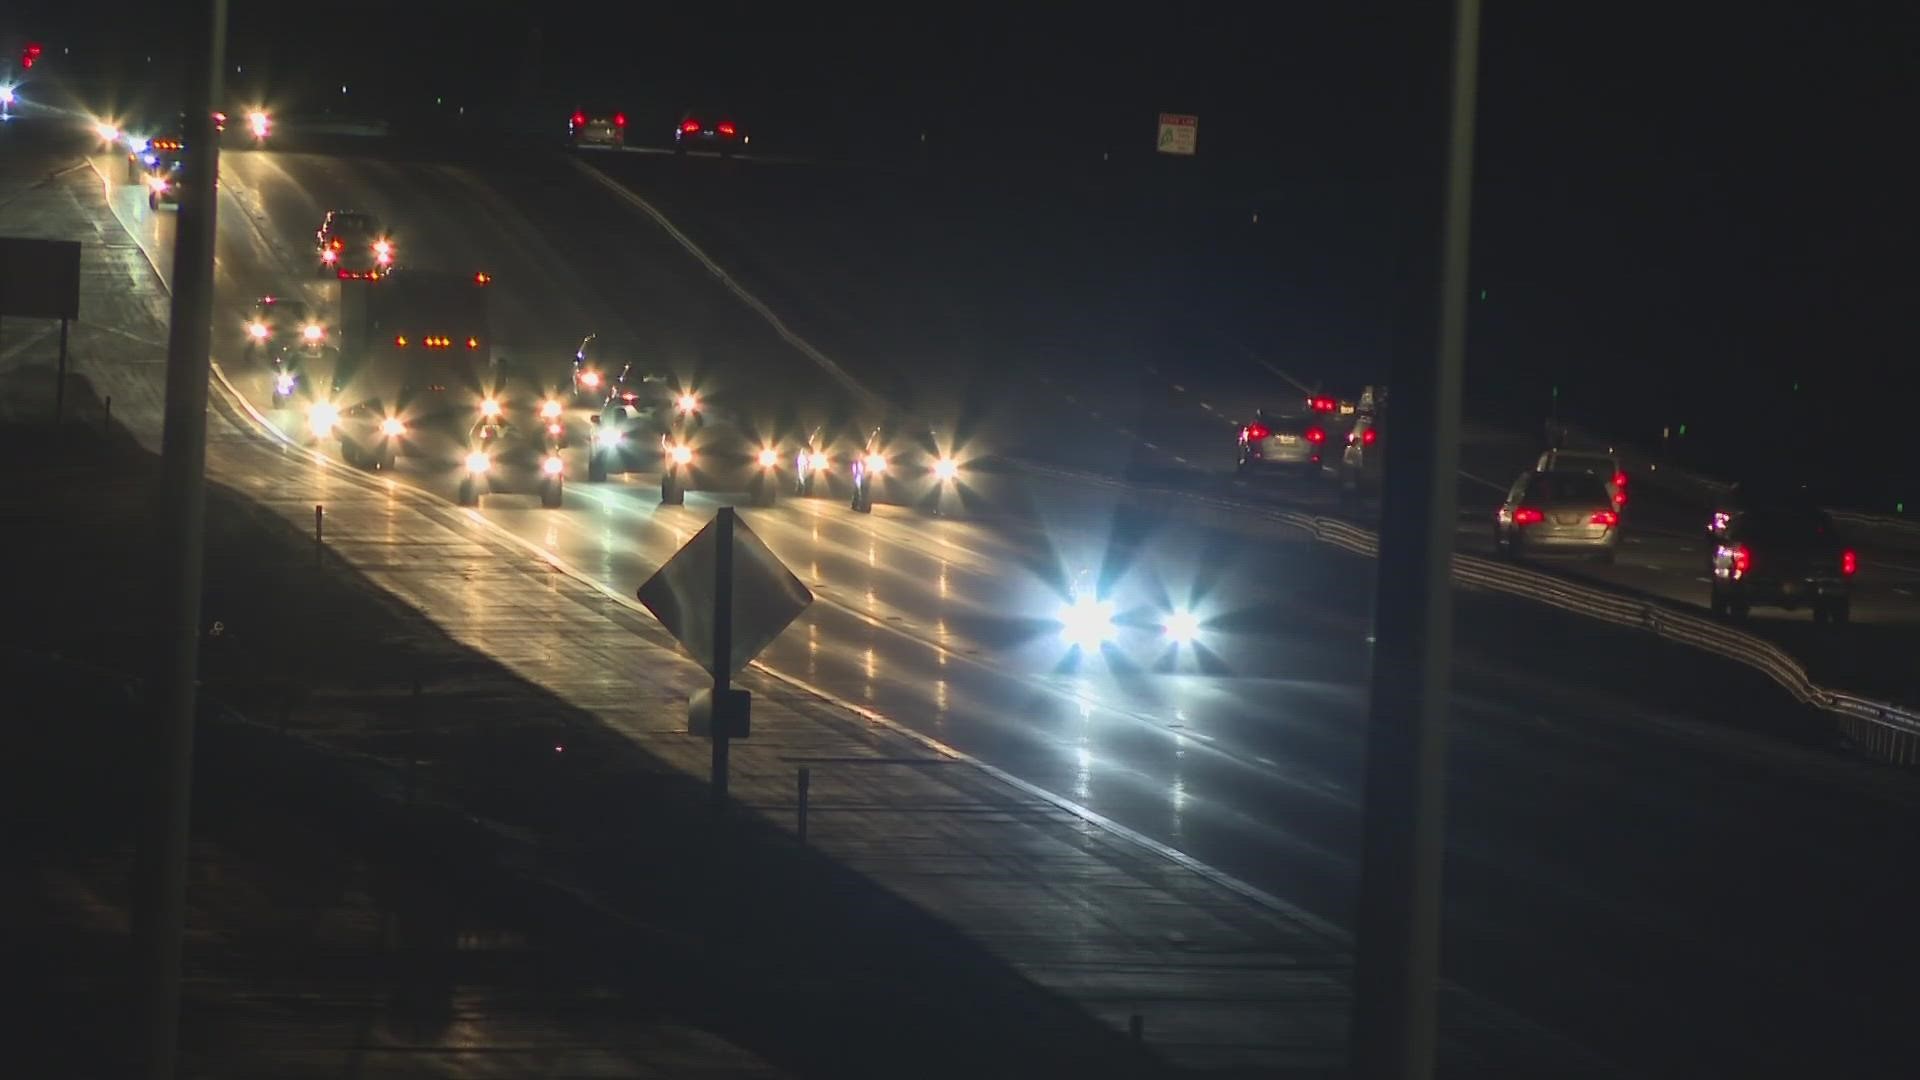 The hope for the exit is to help clear up traffic congestion in the area, according to the Maine Turnpike Authority.